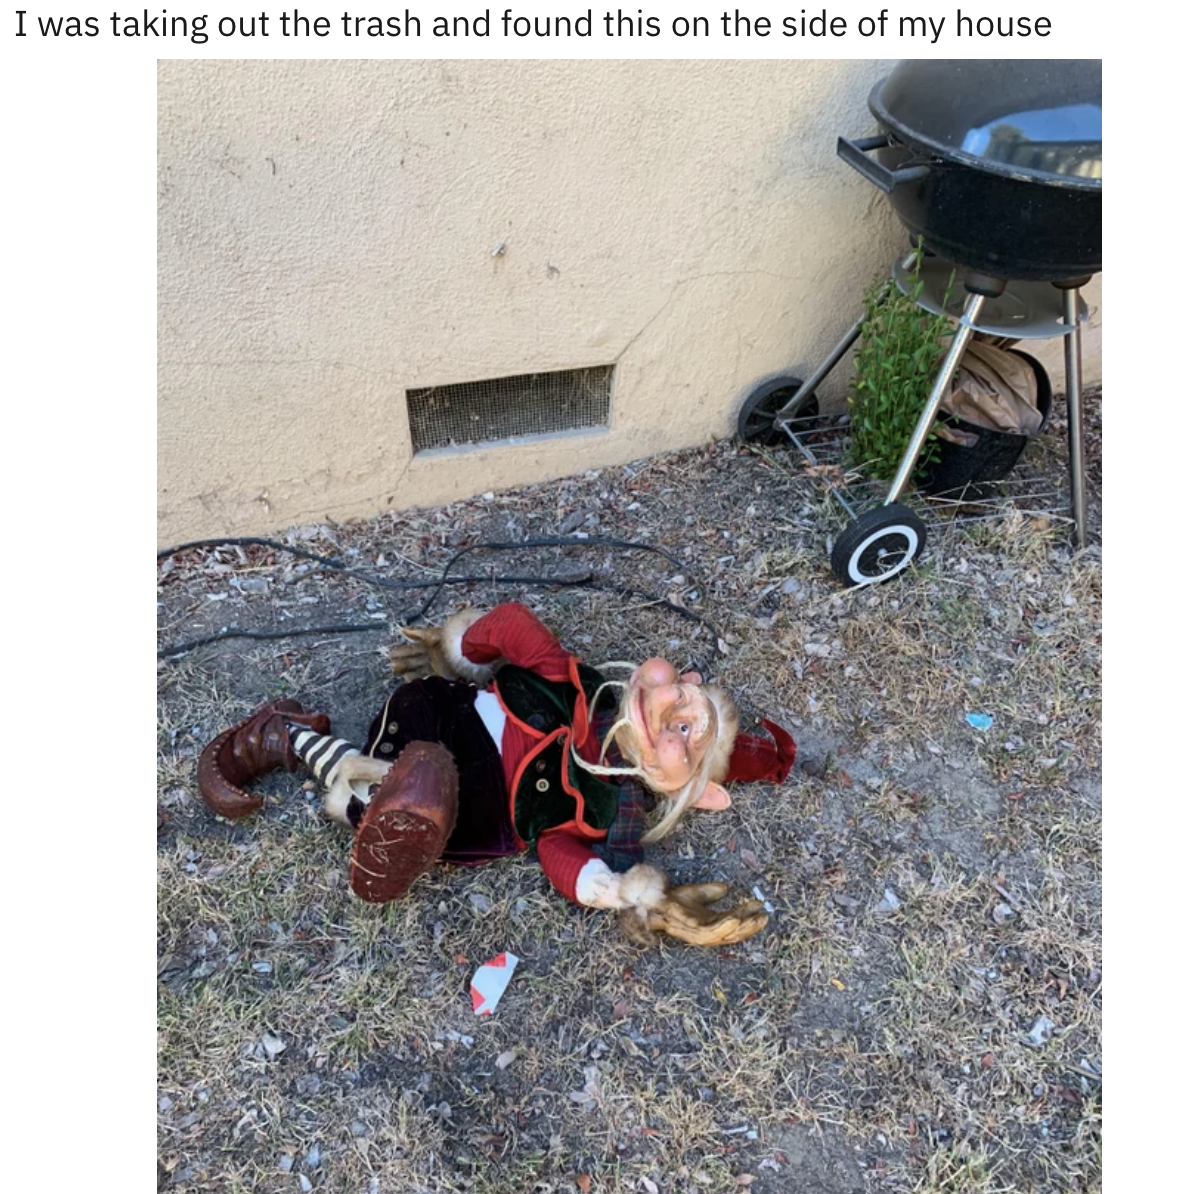 A doll on the ground